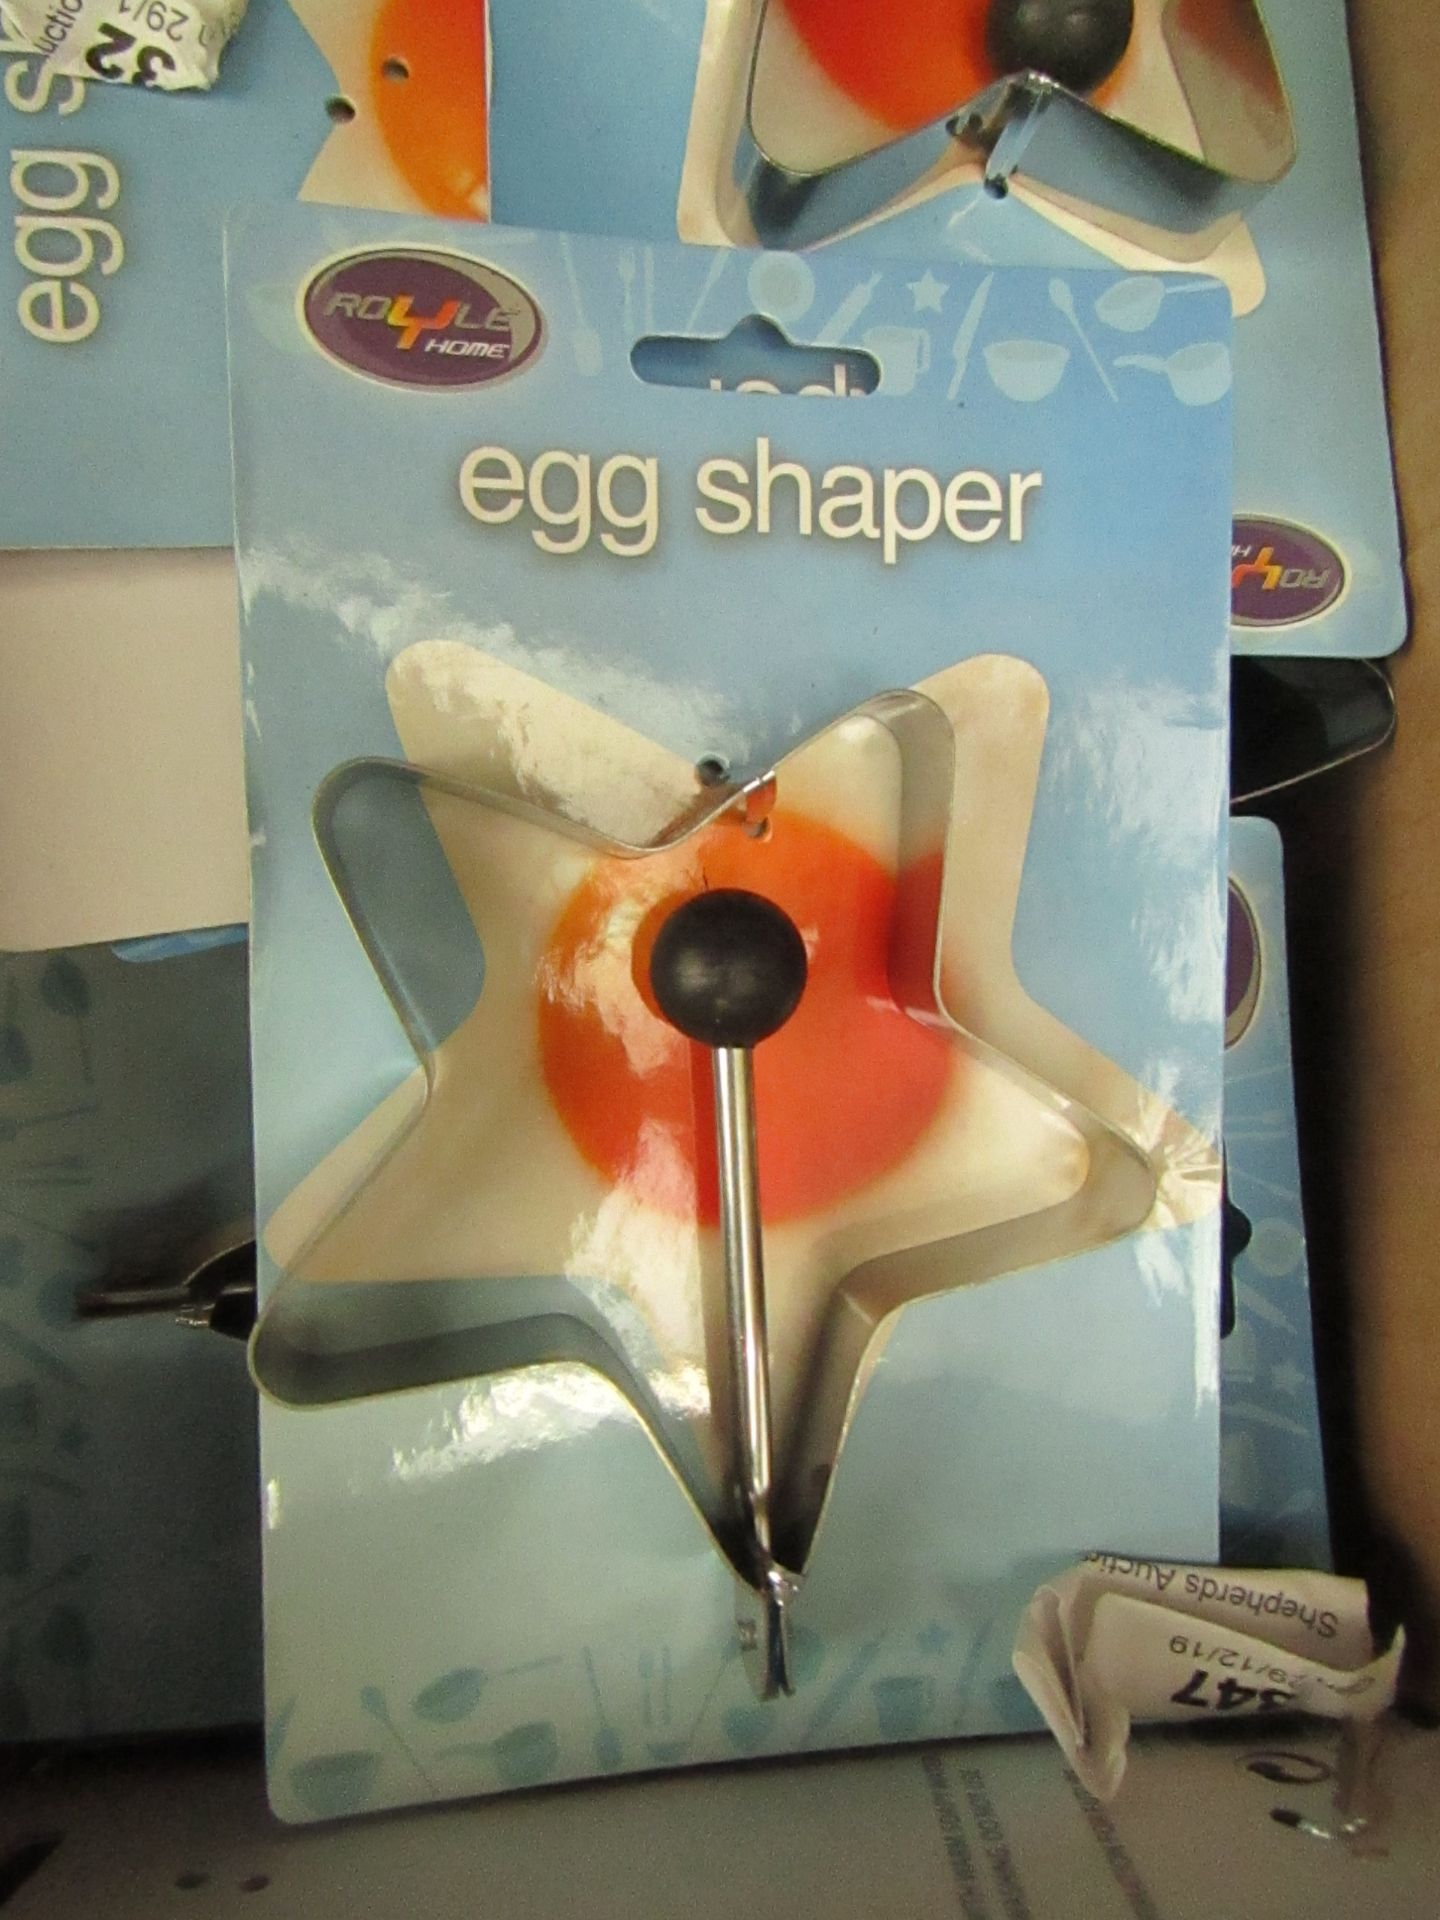 12x Packs of Egg Shapers (Star shape) - All new and packaged.